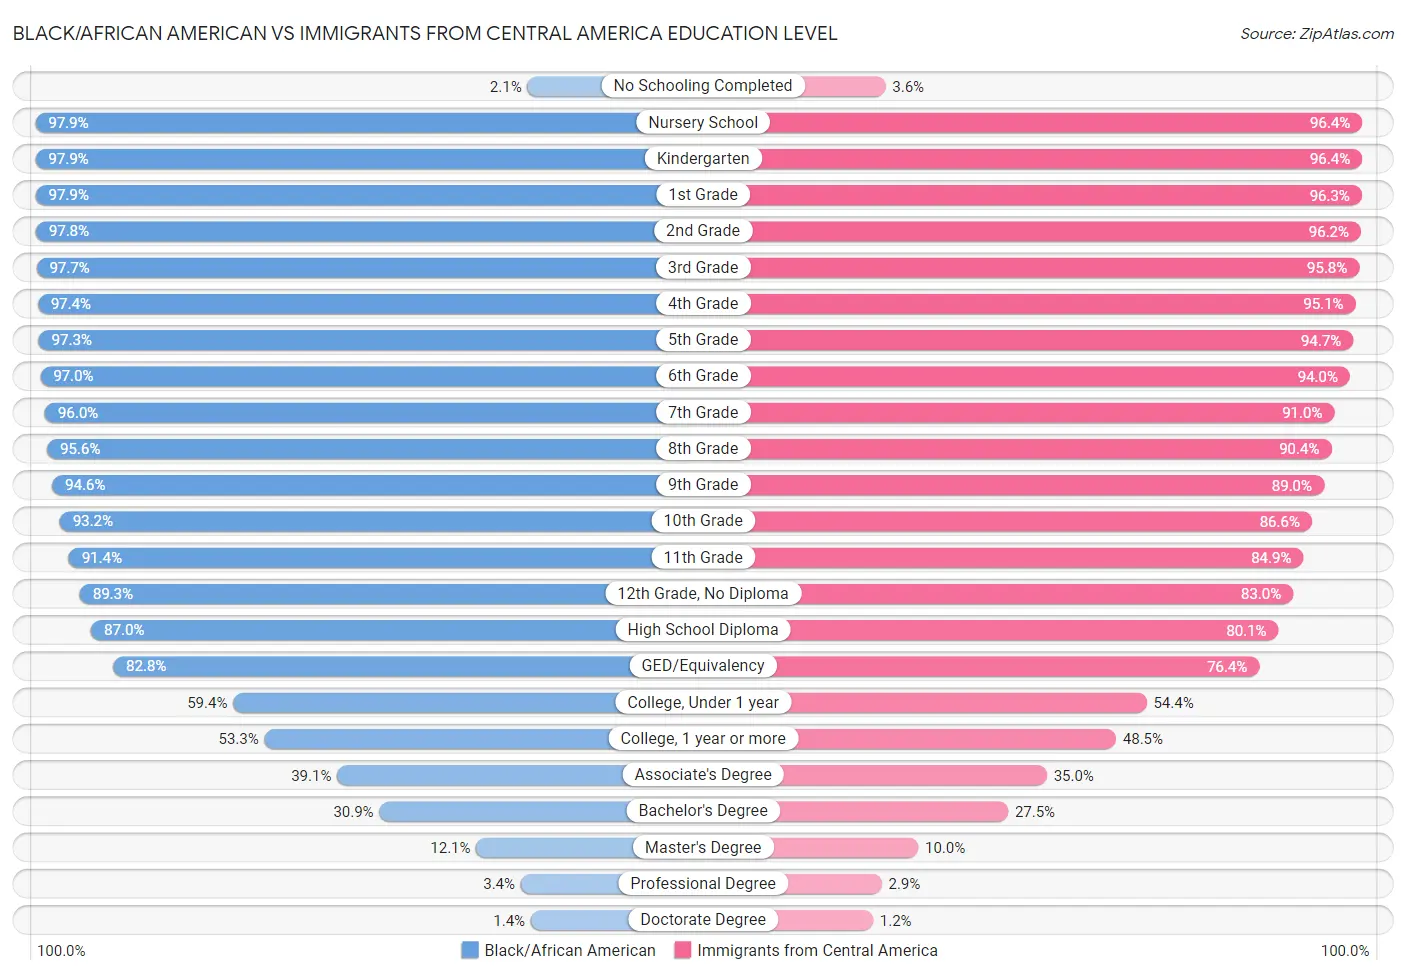 Black/African American vs Immigrants from Central America Education Level